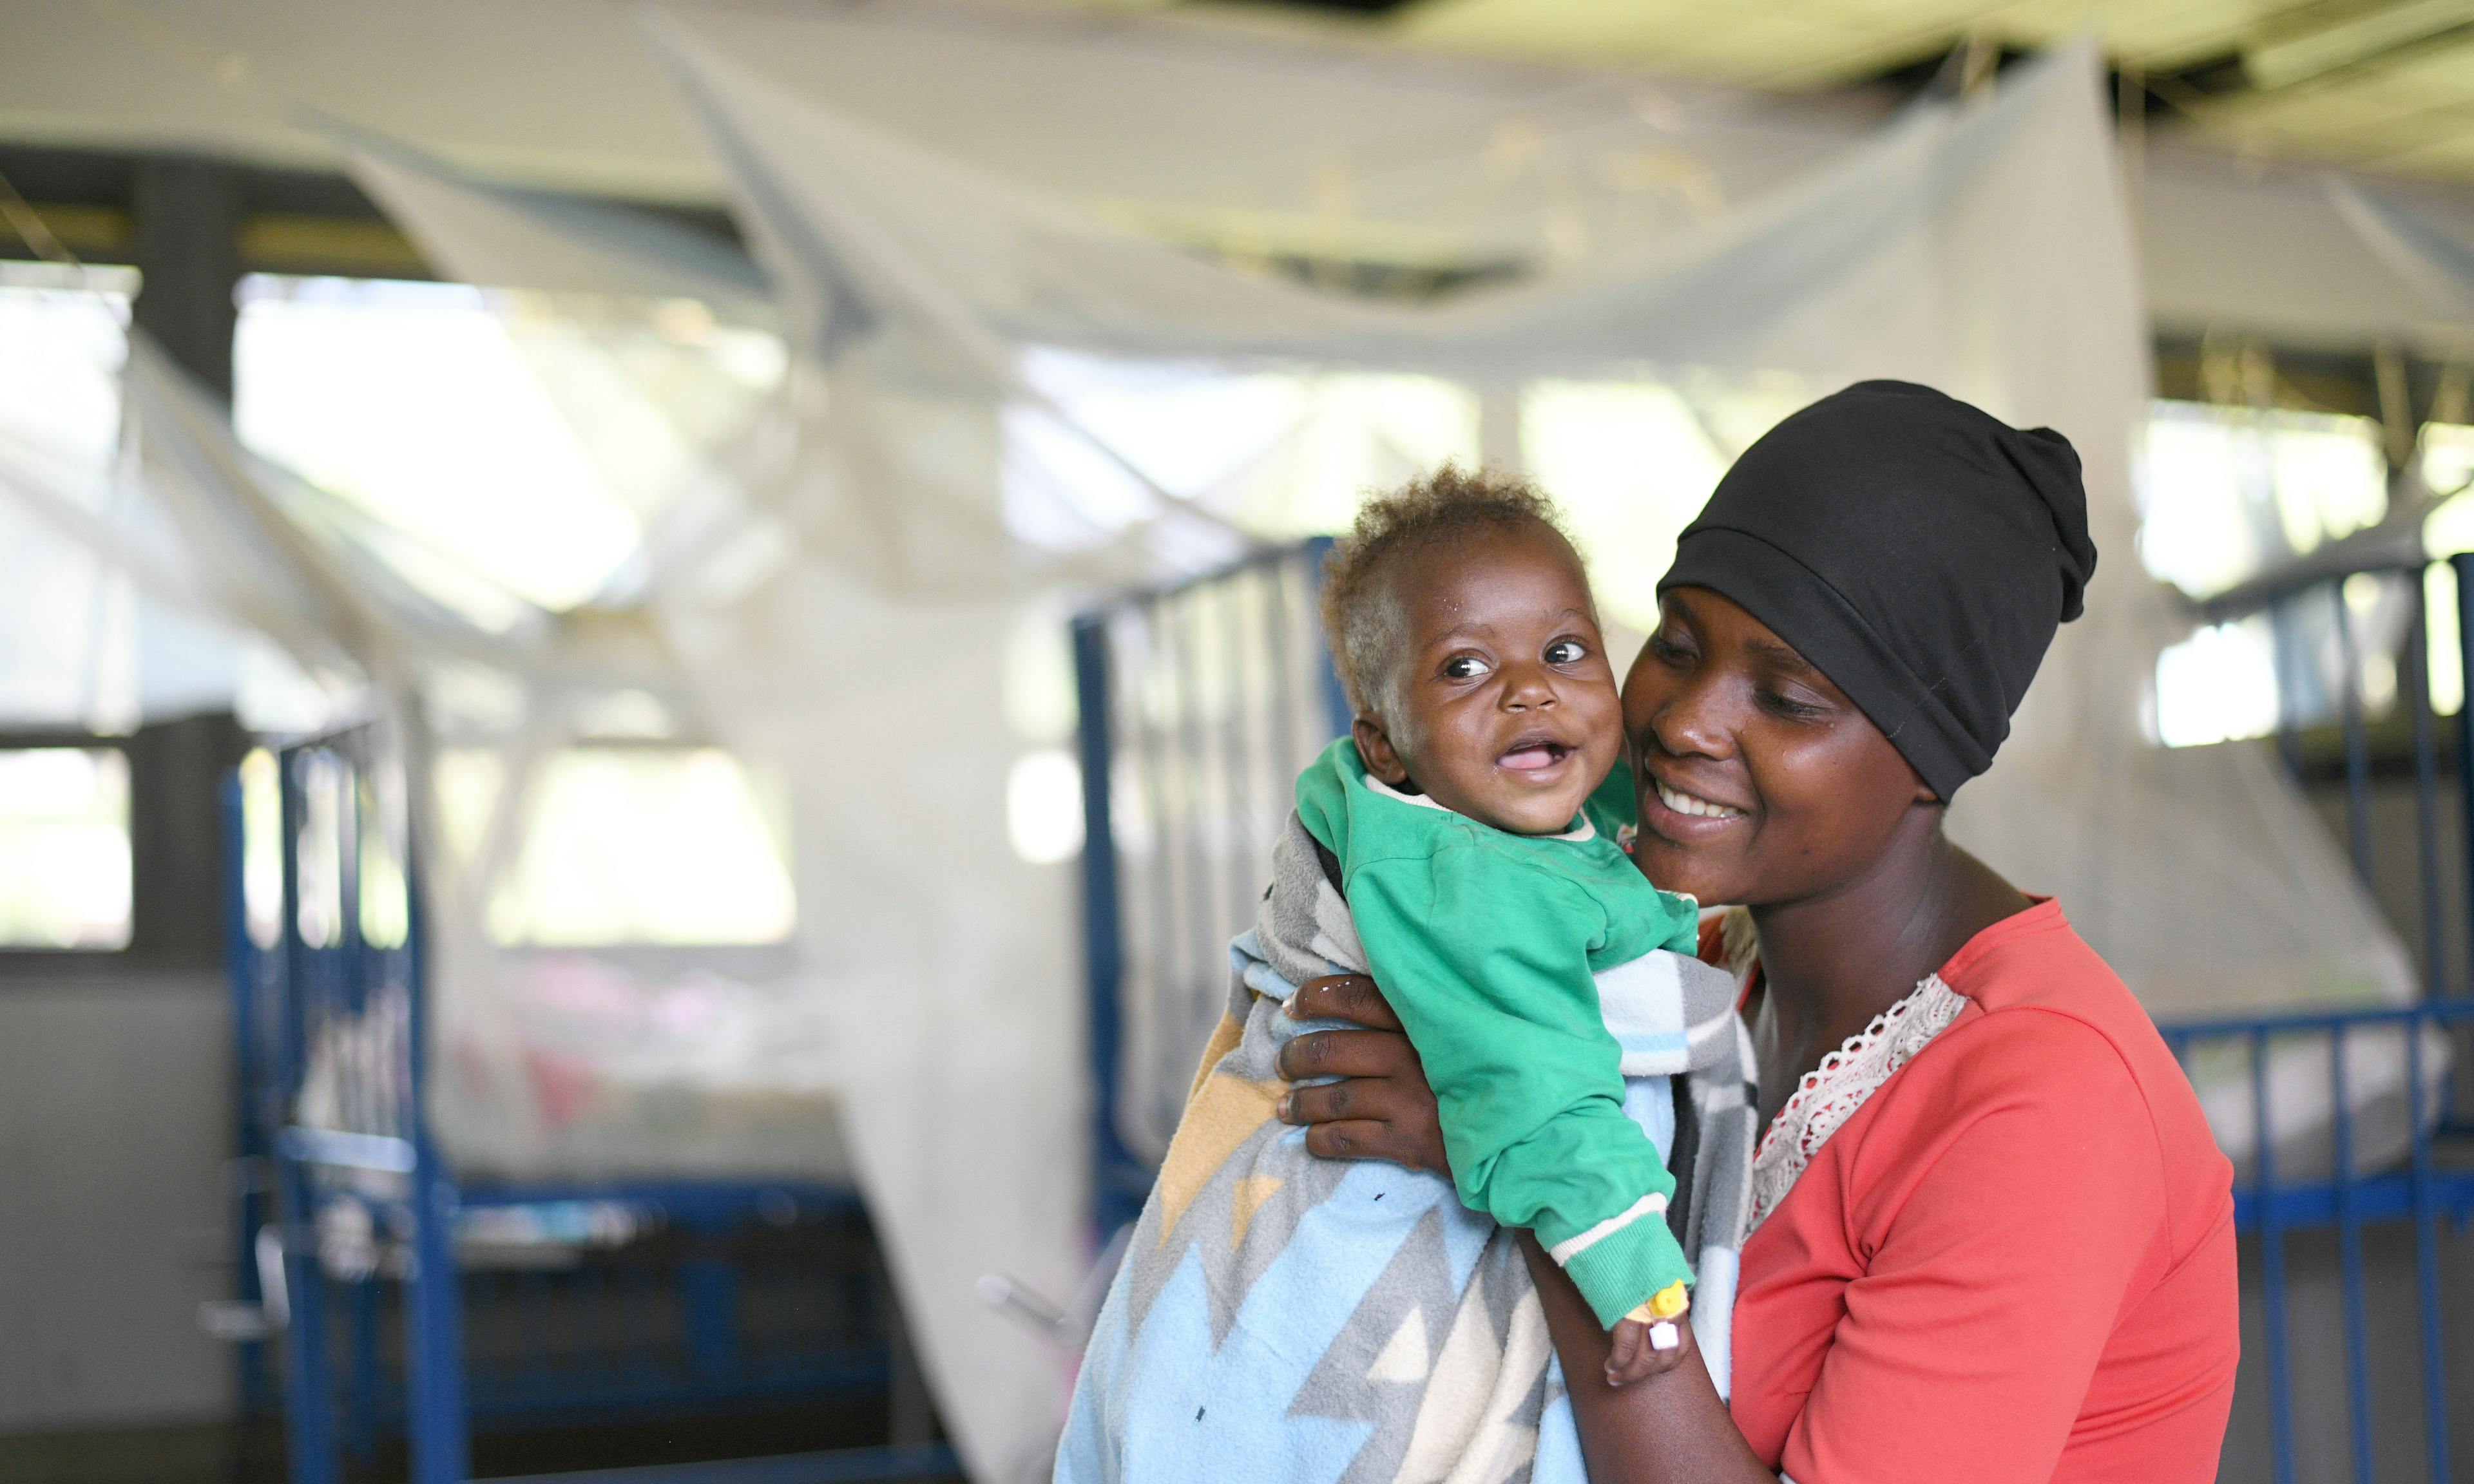 Akatukunda Jovat interacts with her ten months baby Amutuhirwe Traesure in the pediatric ward at Itojo hospital in Ntungamo district. The ward had no malaria case because the district implements Ministry of health and UNICEF interventions including mosquito nets among others in fight against malaria